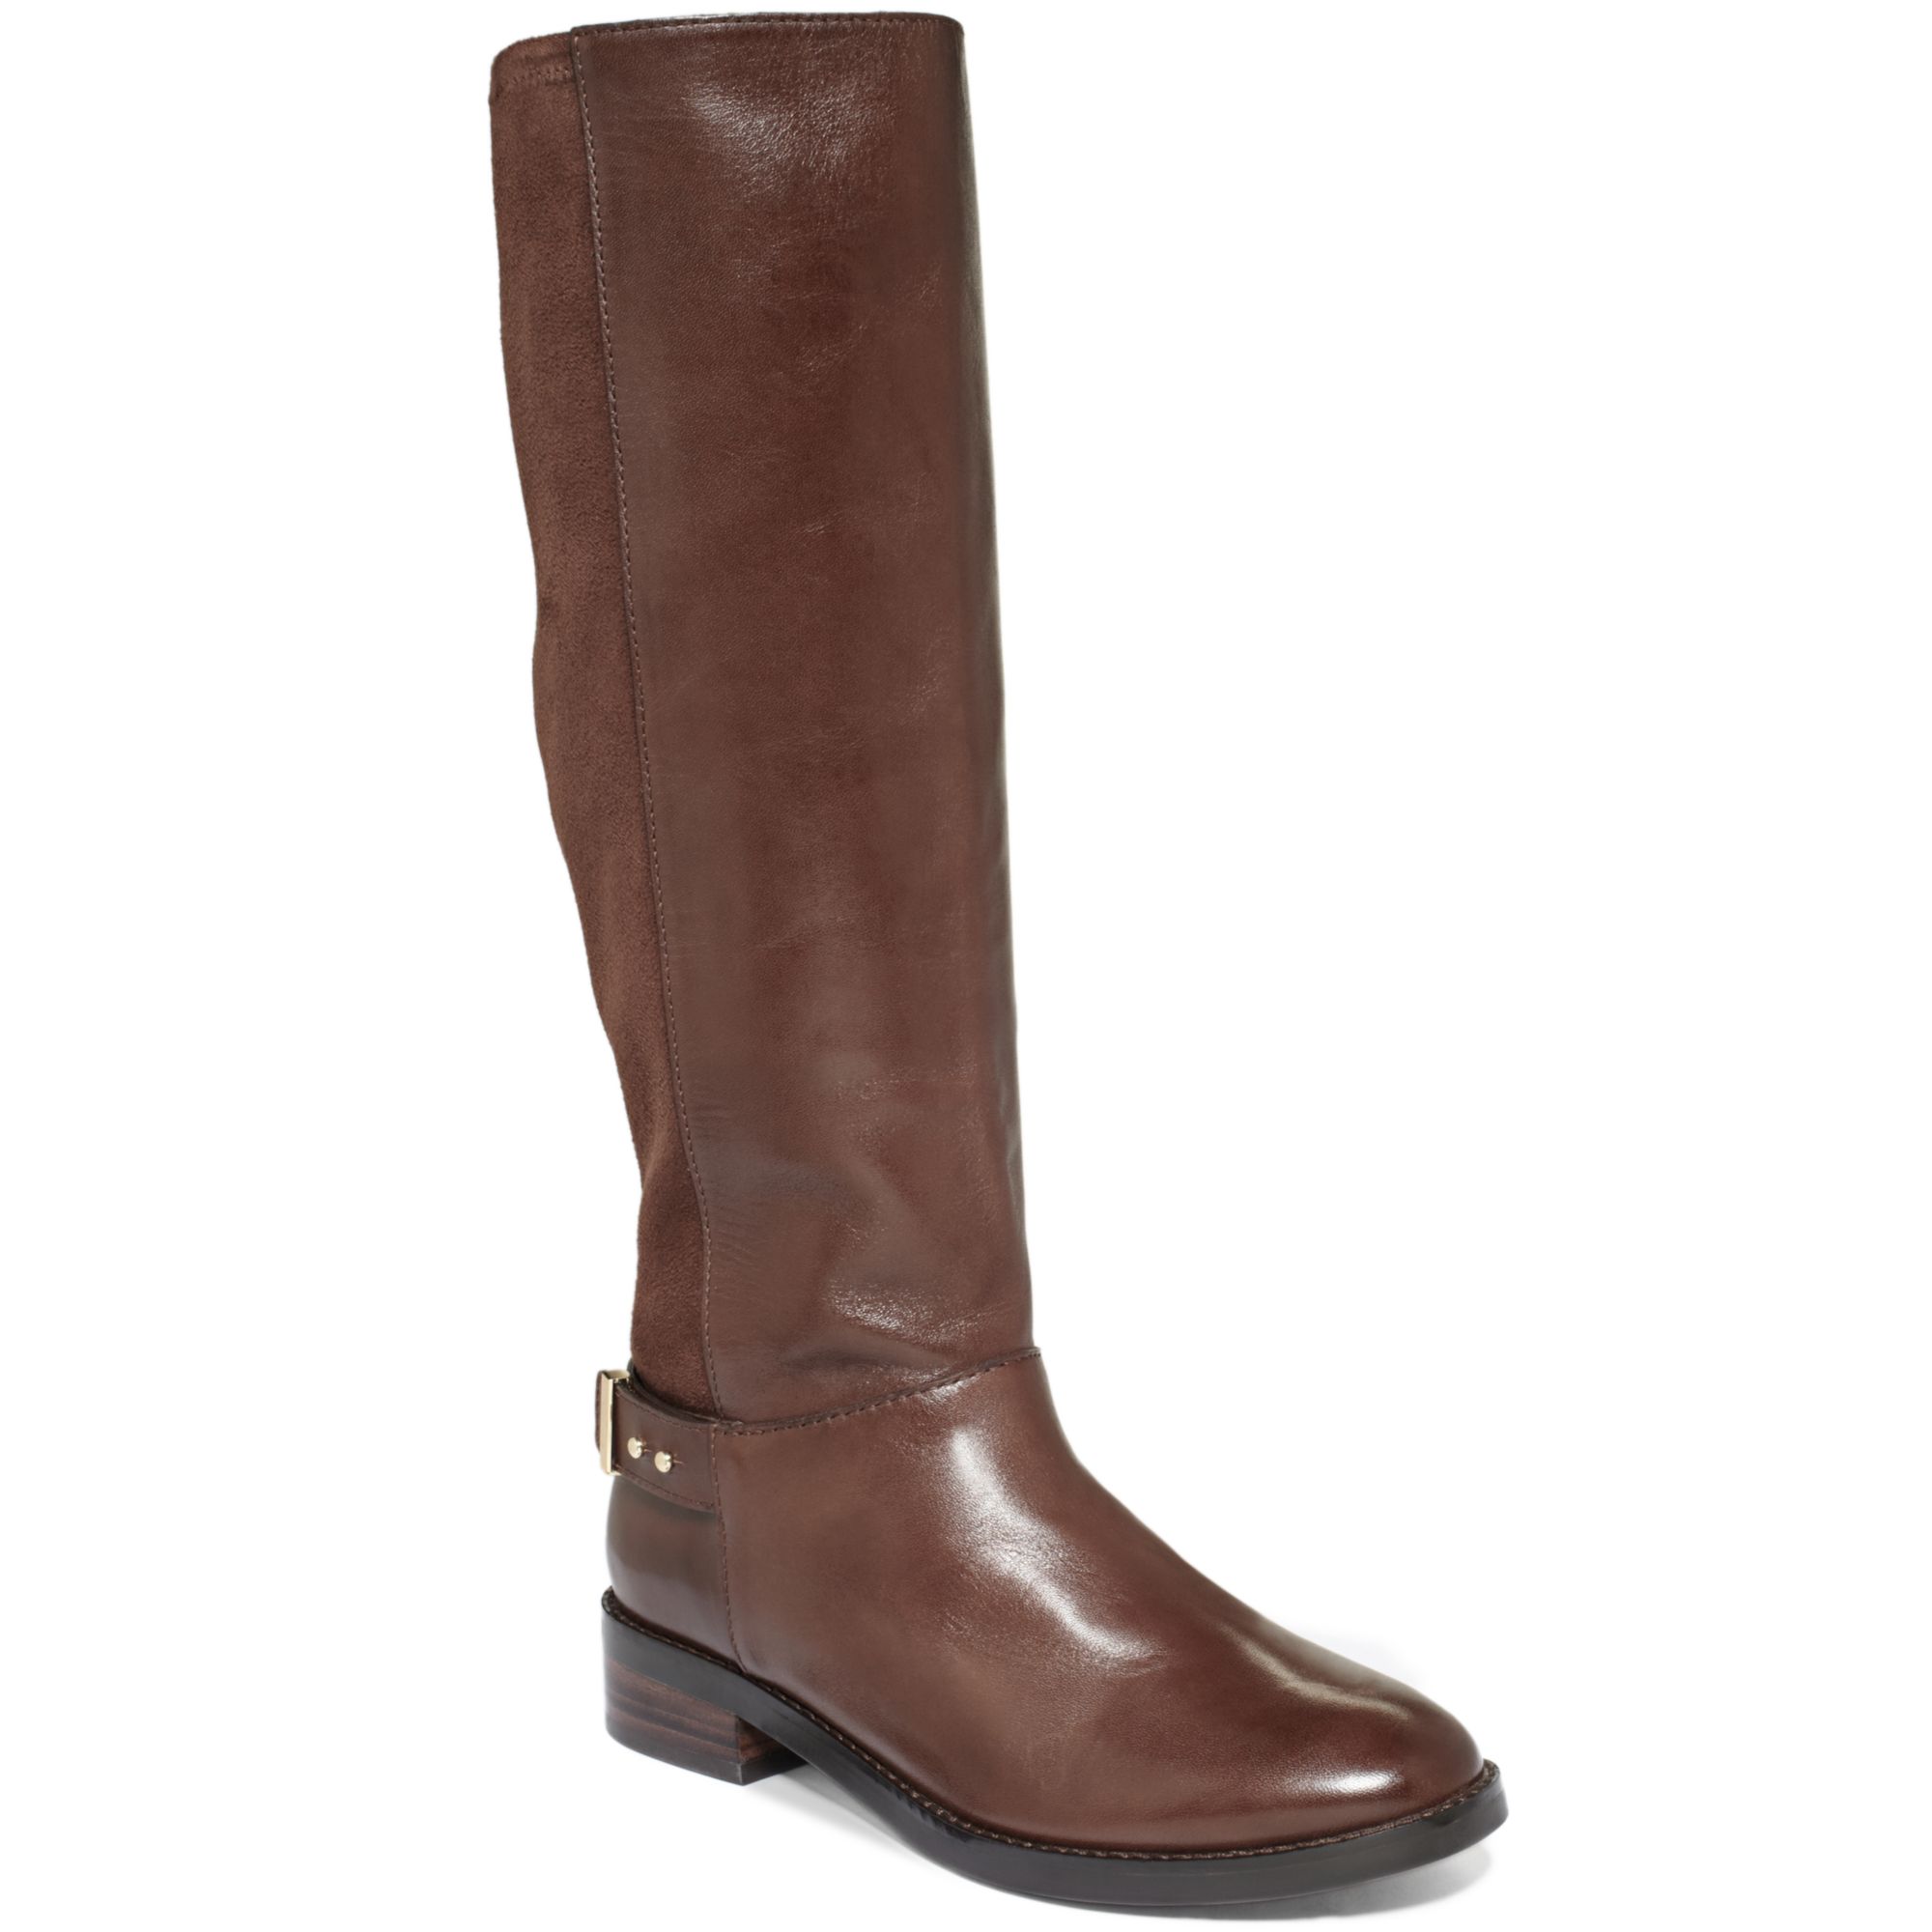 Lyst - Cole haan Adler Tall Boots in Brown